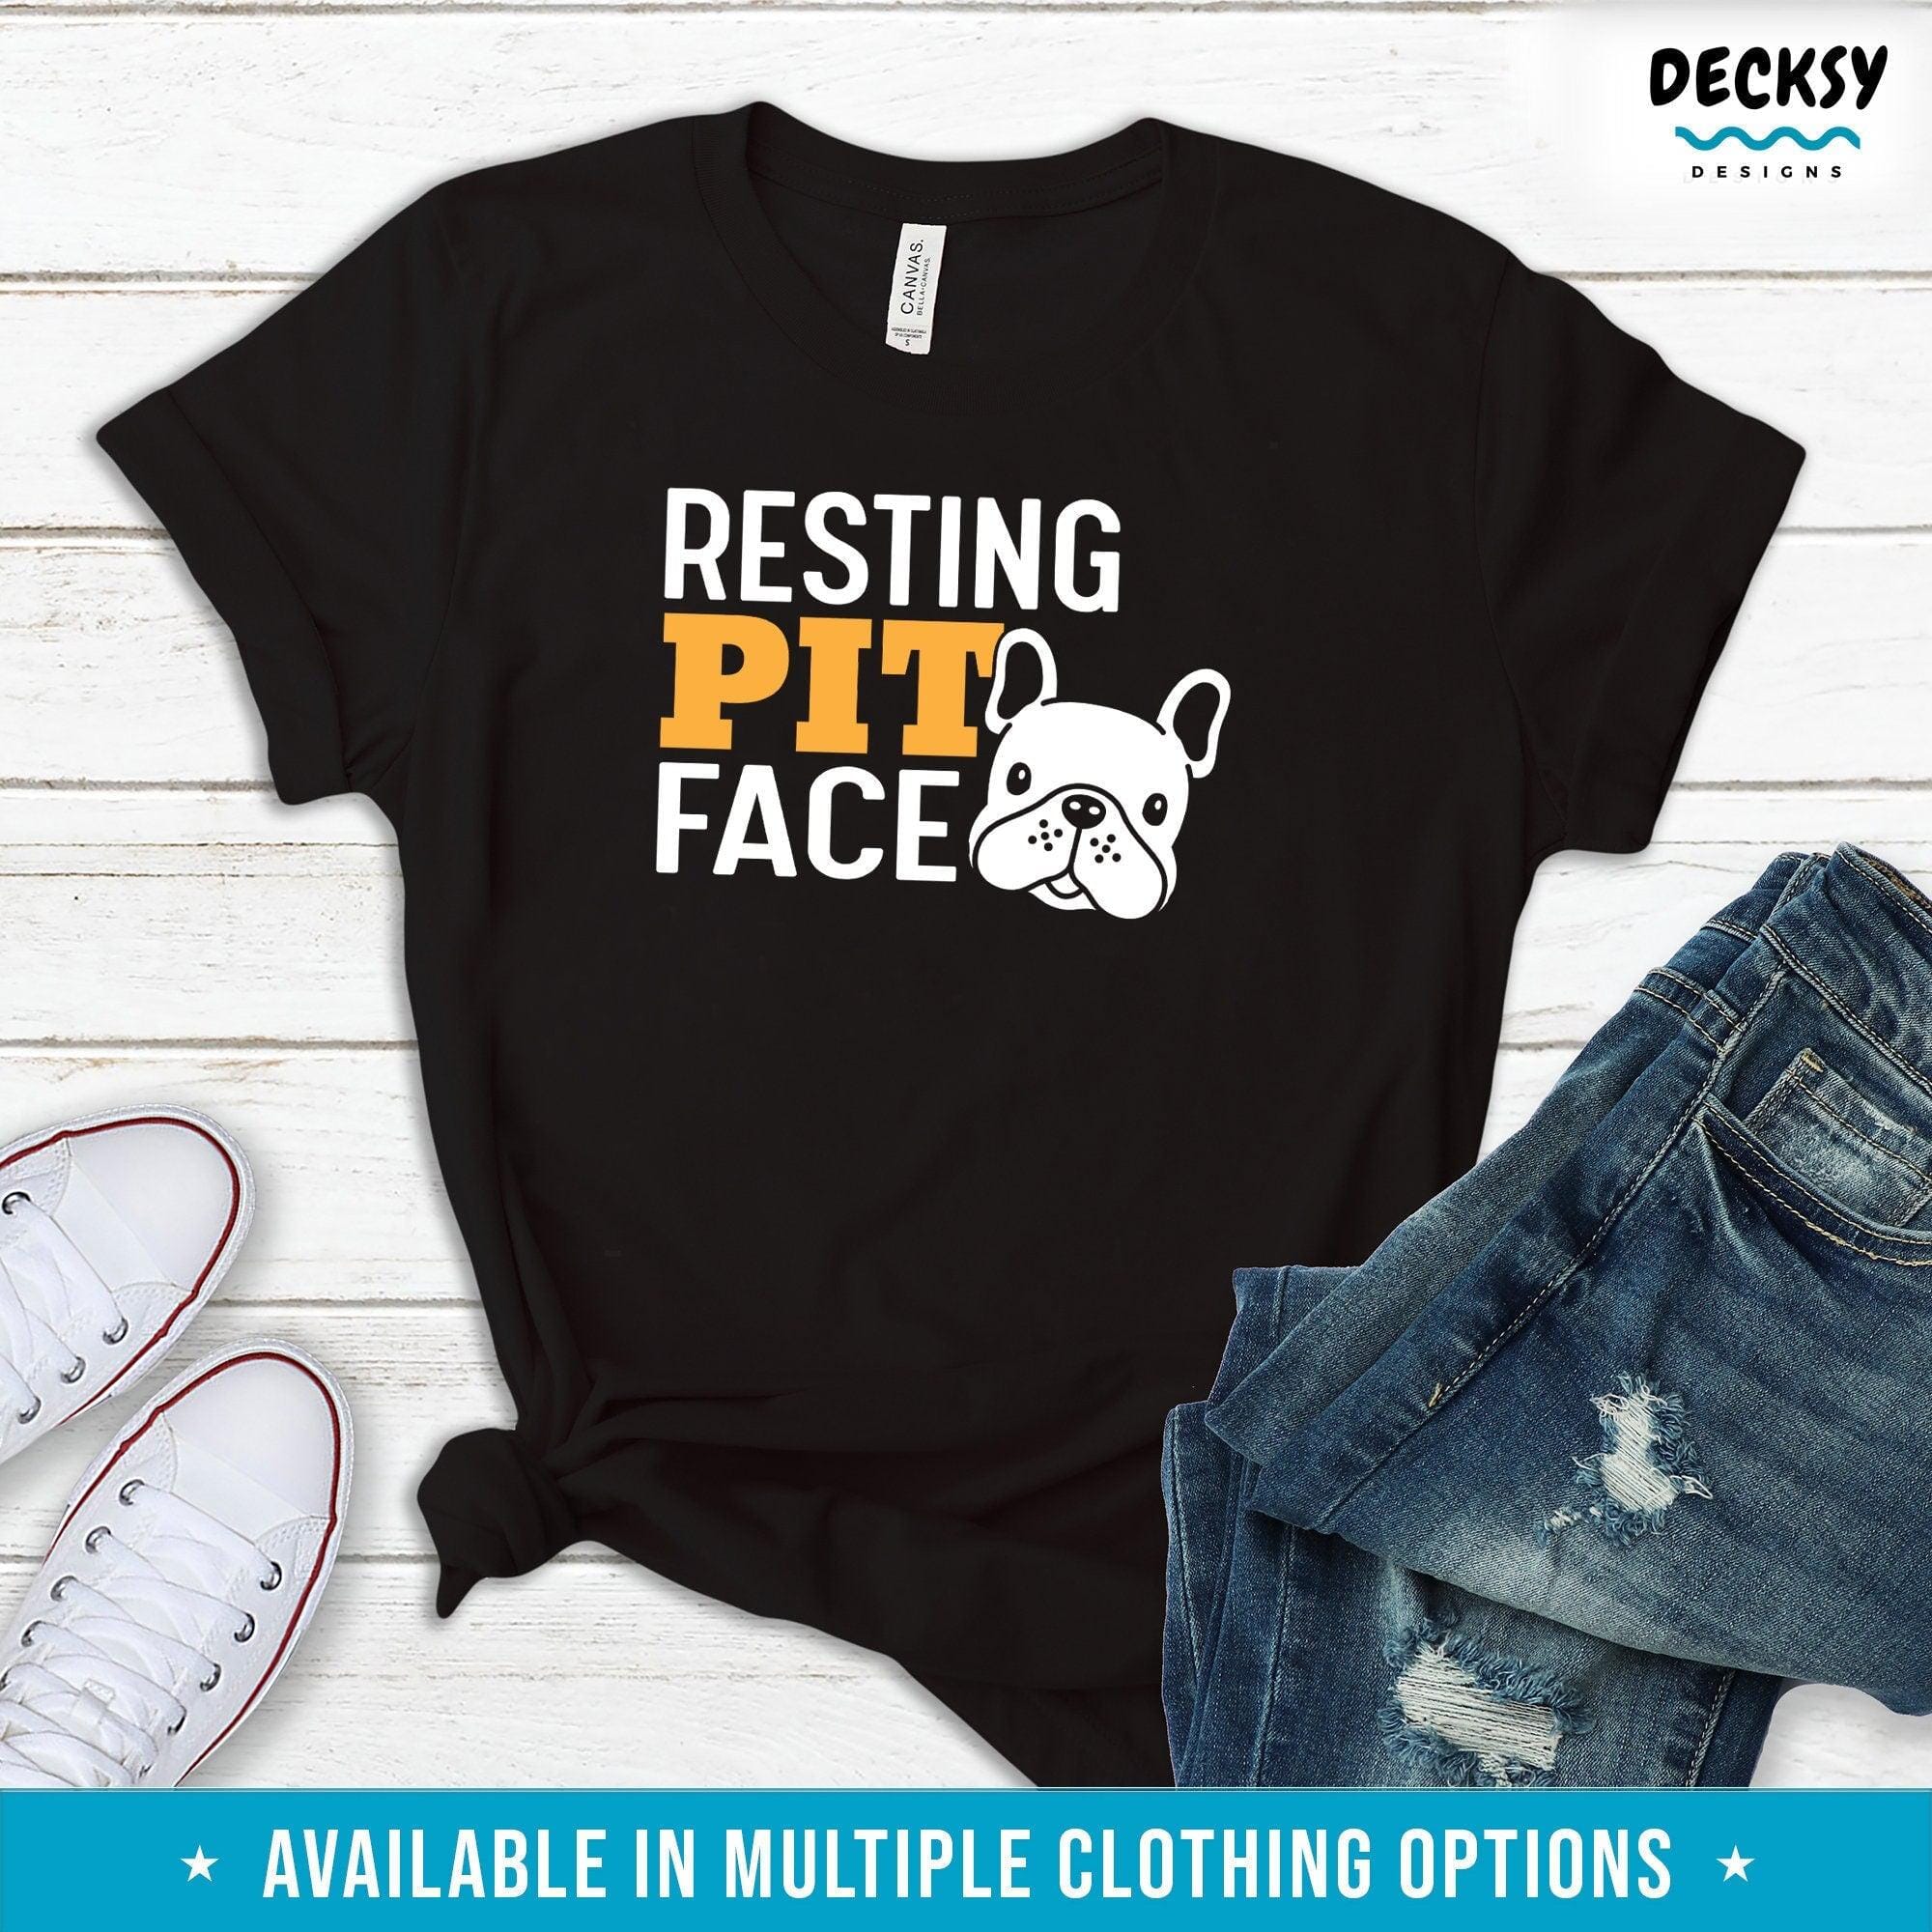 Pitbull Dog T-shirt, Dog Face Gift-Clothing:Gender-Neutral Adult Clothing:Tops & Tees:T-shirts:Graphic Tees-DecksyDesigns